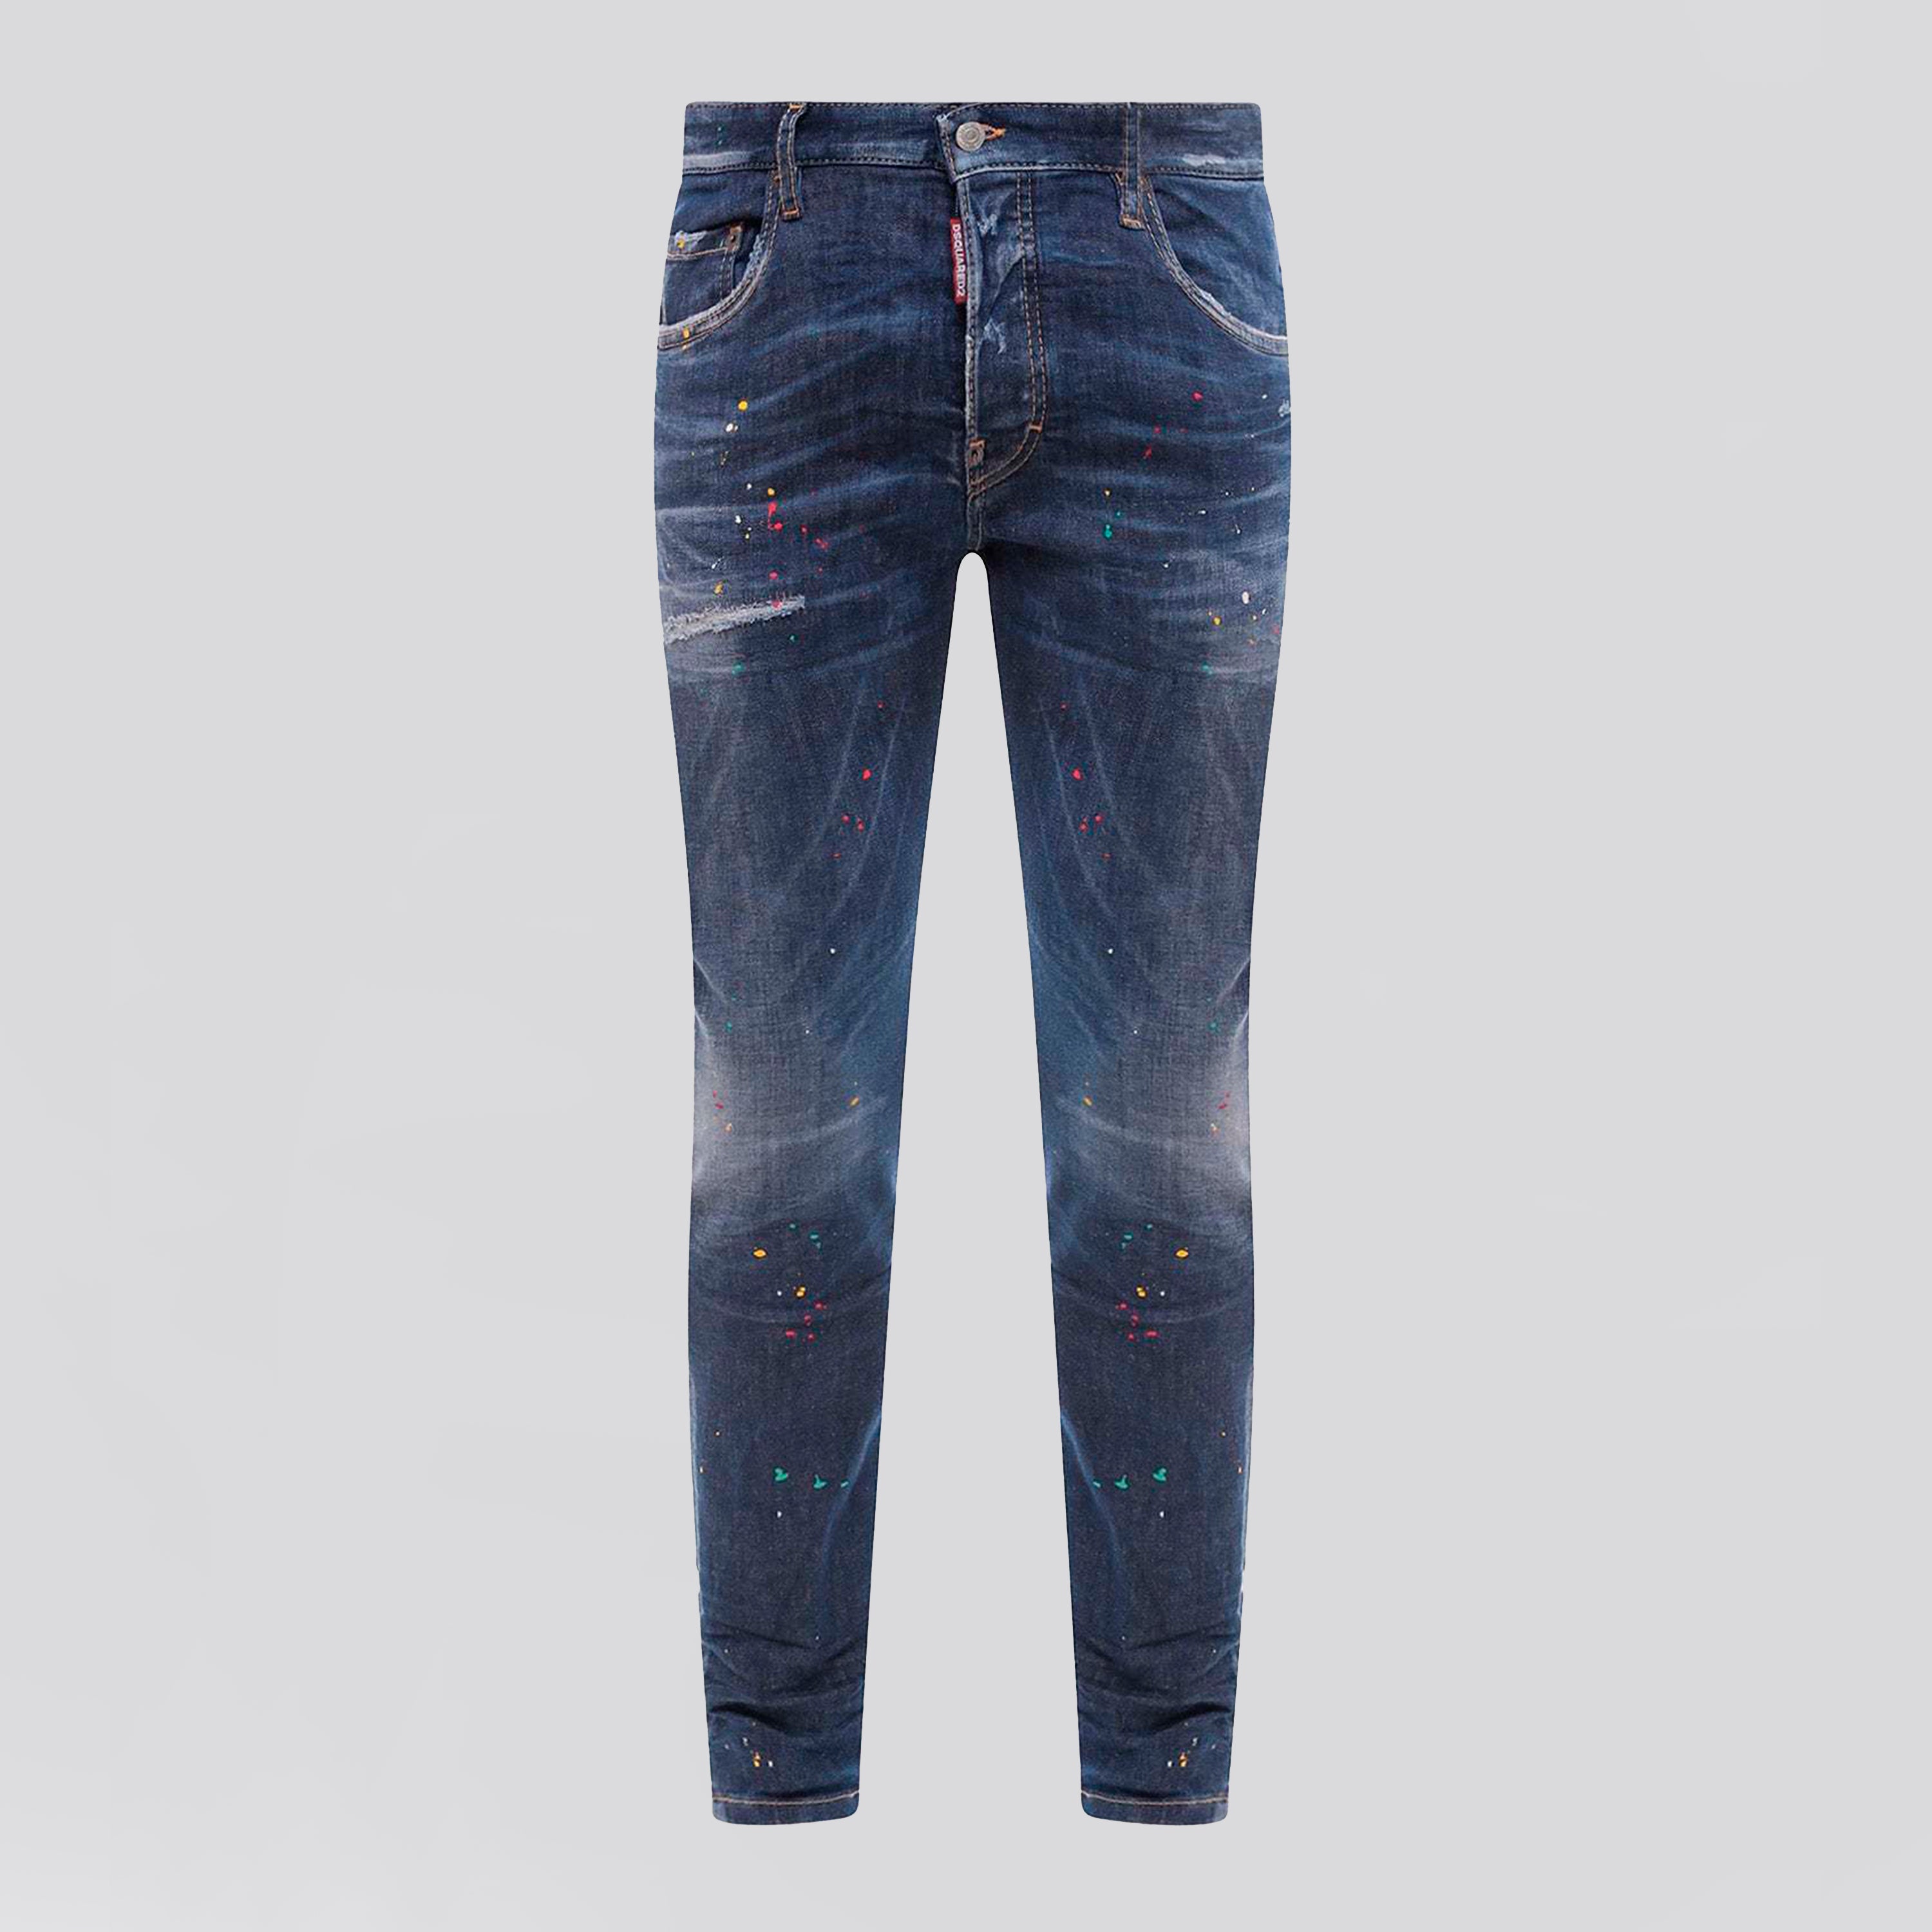 Jeans Denim Dsquared2 Super Twinky Painted